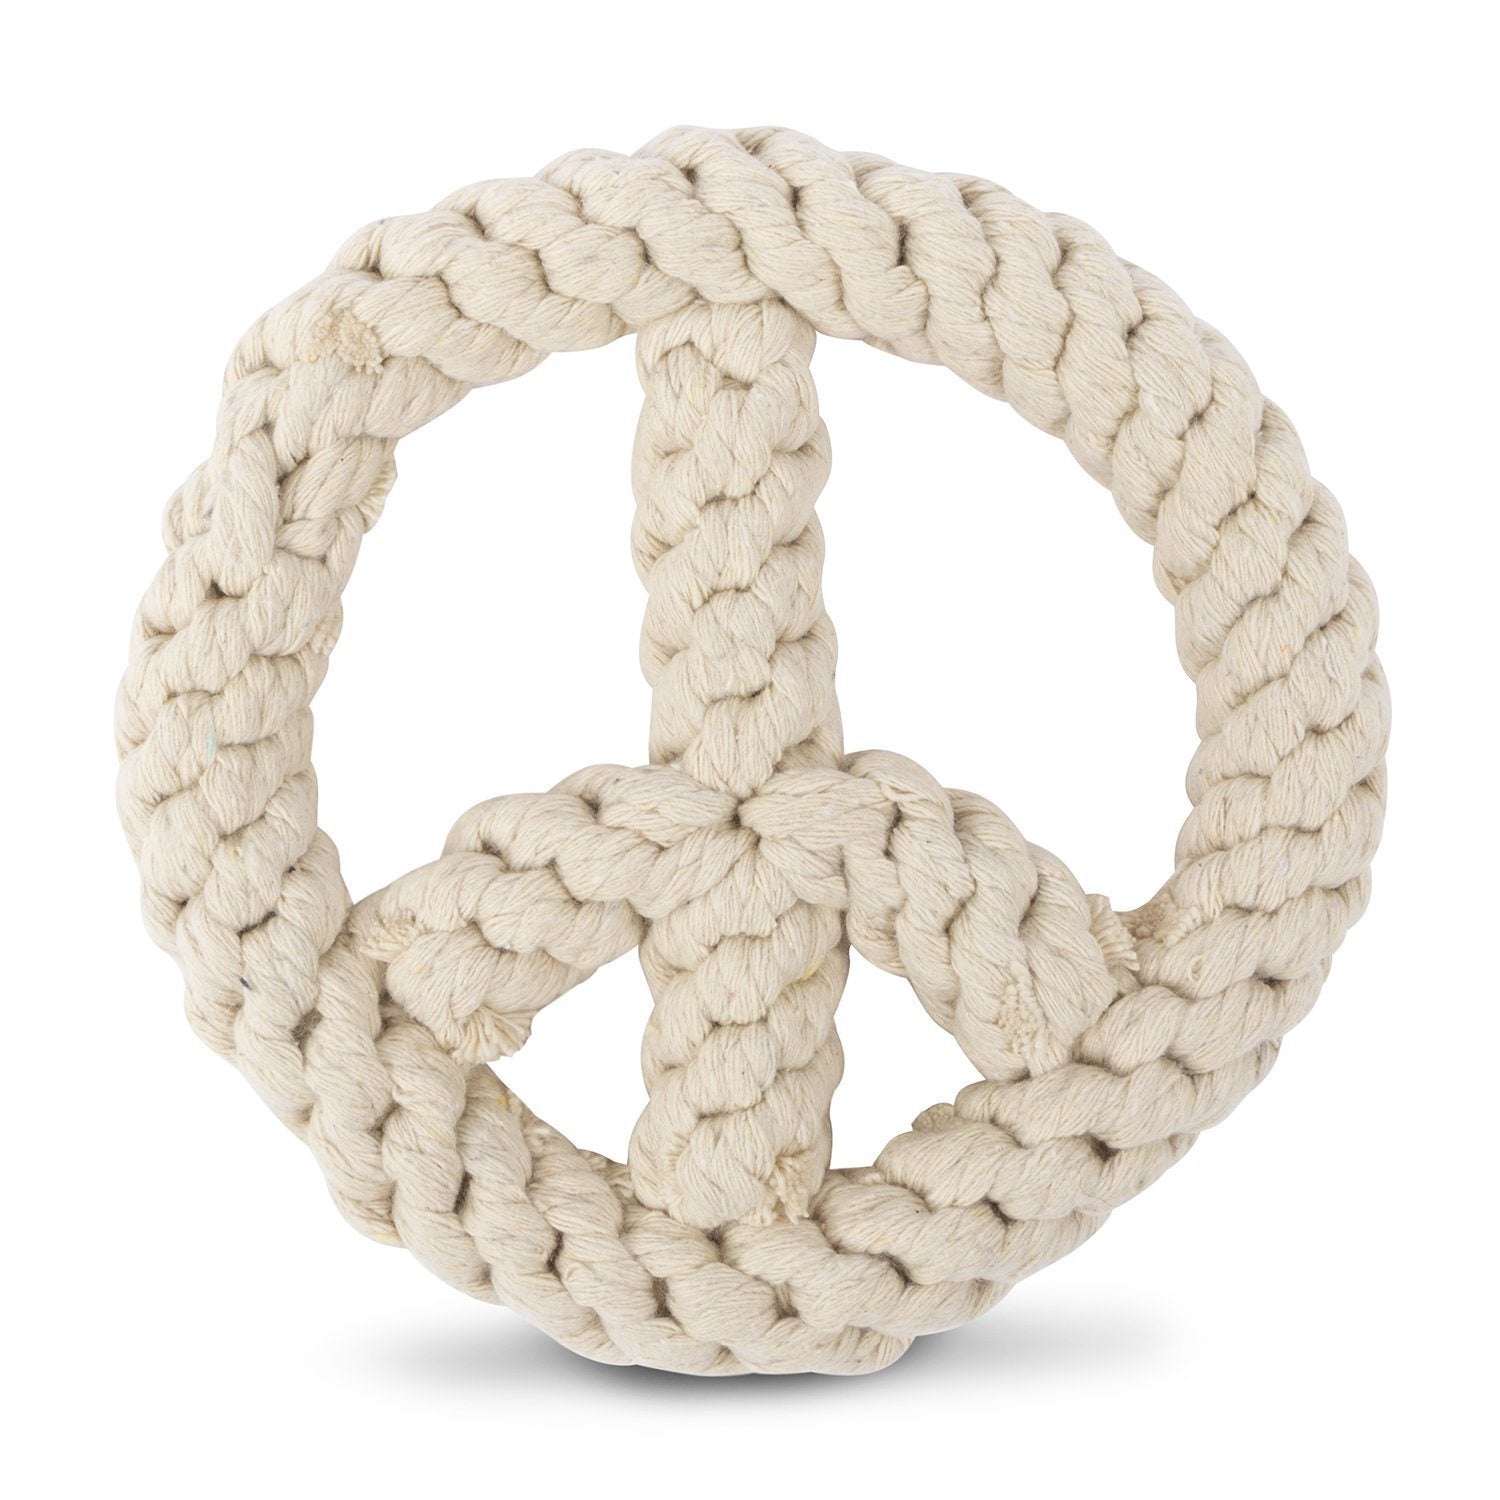 Rope Toy - Peace On Earth Rope Dog Toy